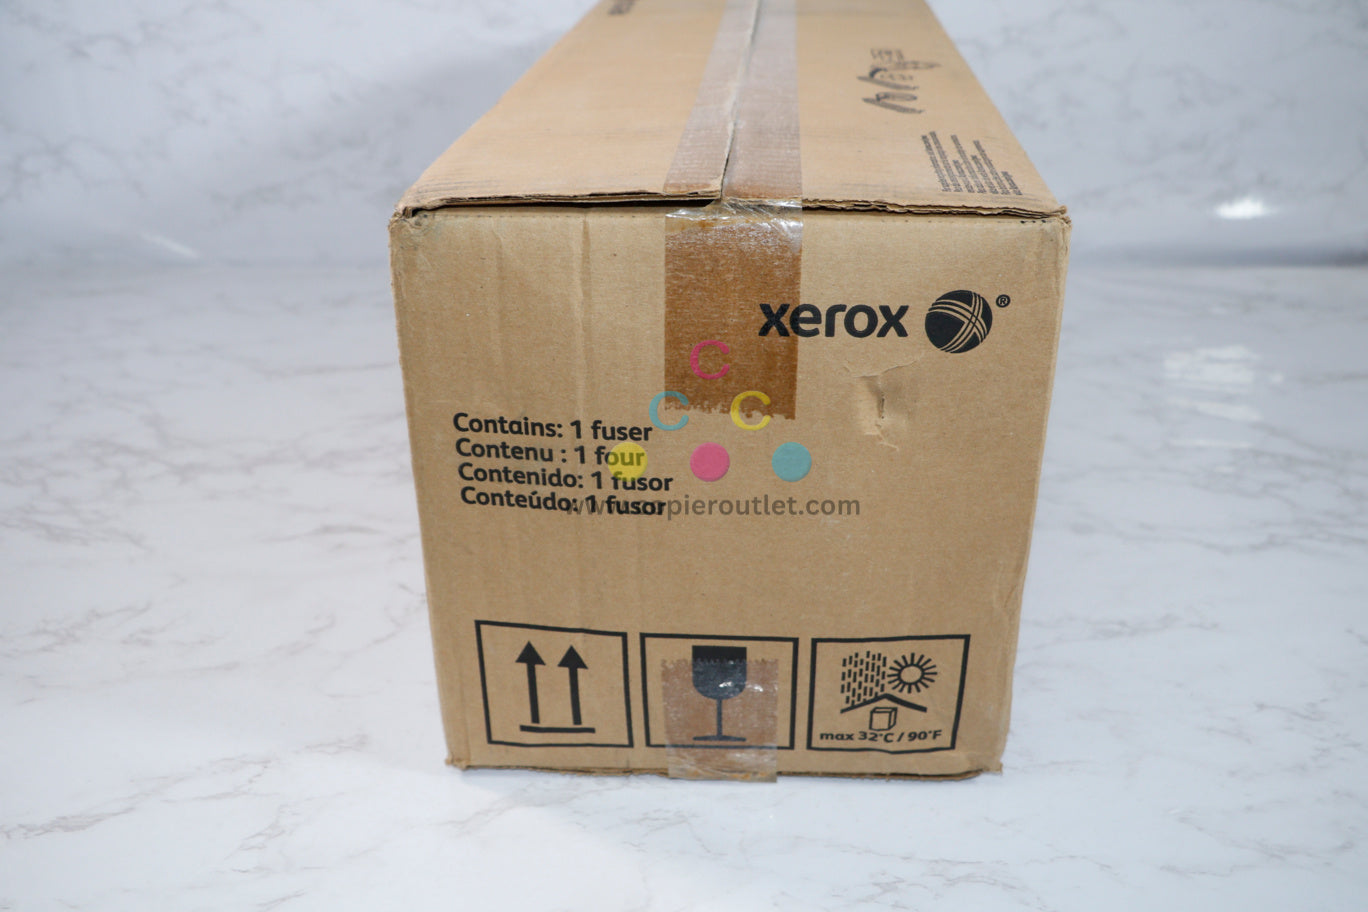 New / Partially Open OEM Xerox DocuColor 240 Fuser Assembly 008R12988 110/120 Volt